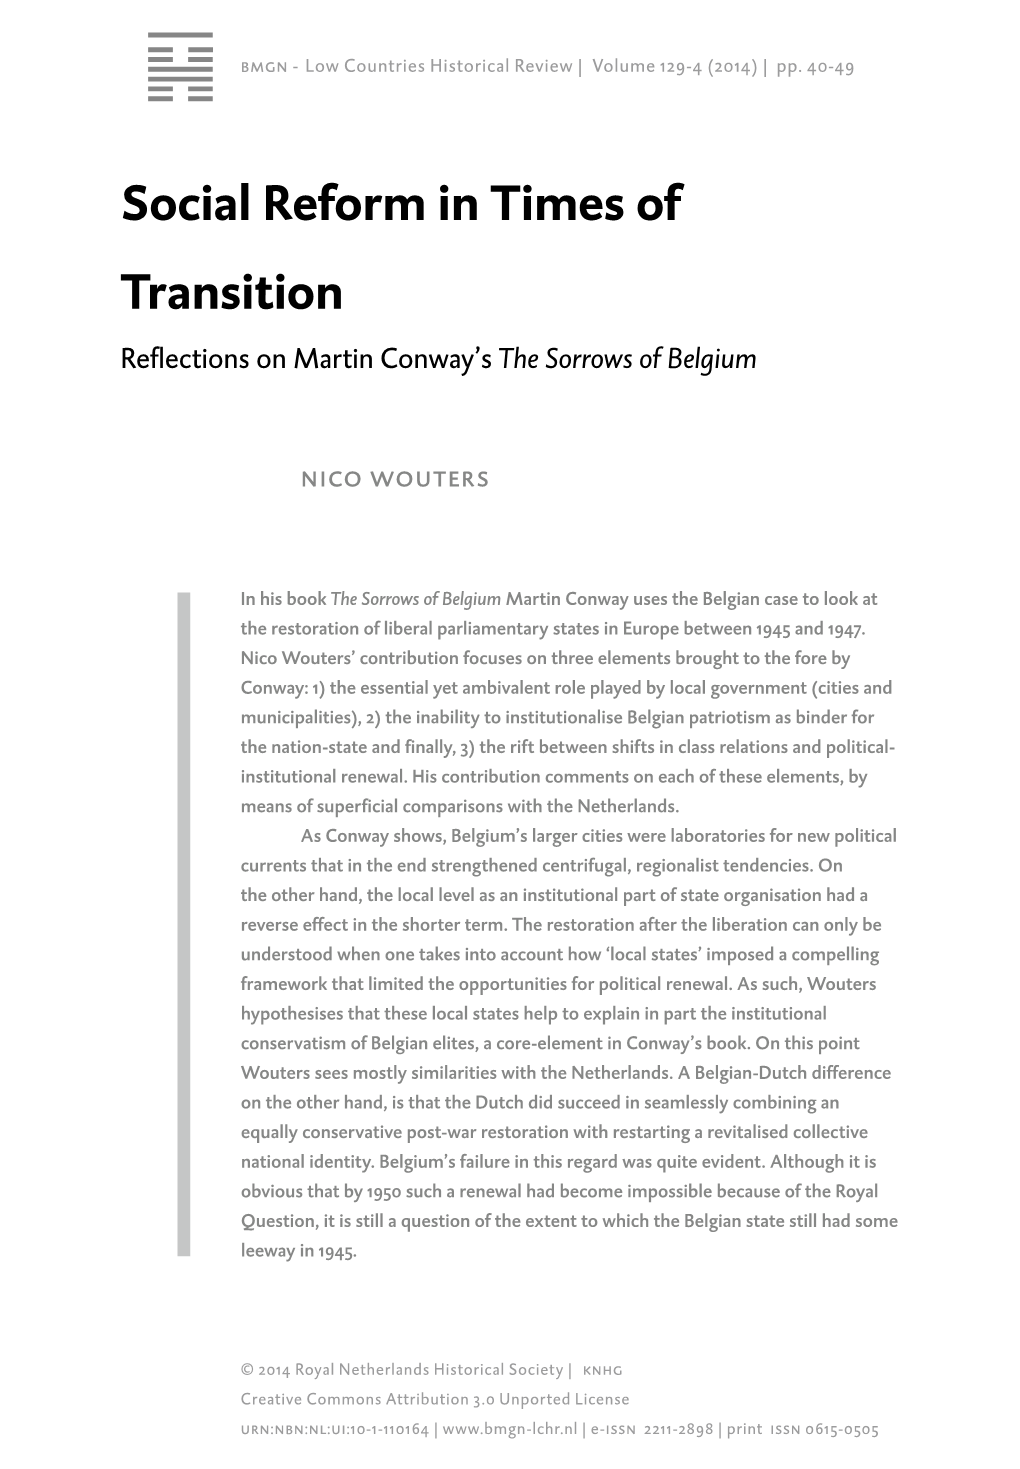 Social Reform in Times of Transition Reflections on Martin Conway’S the Sorrows of Belgium